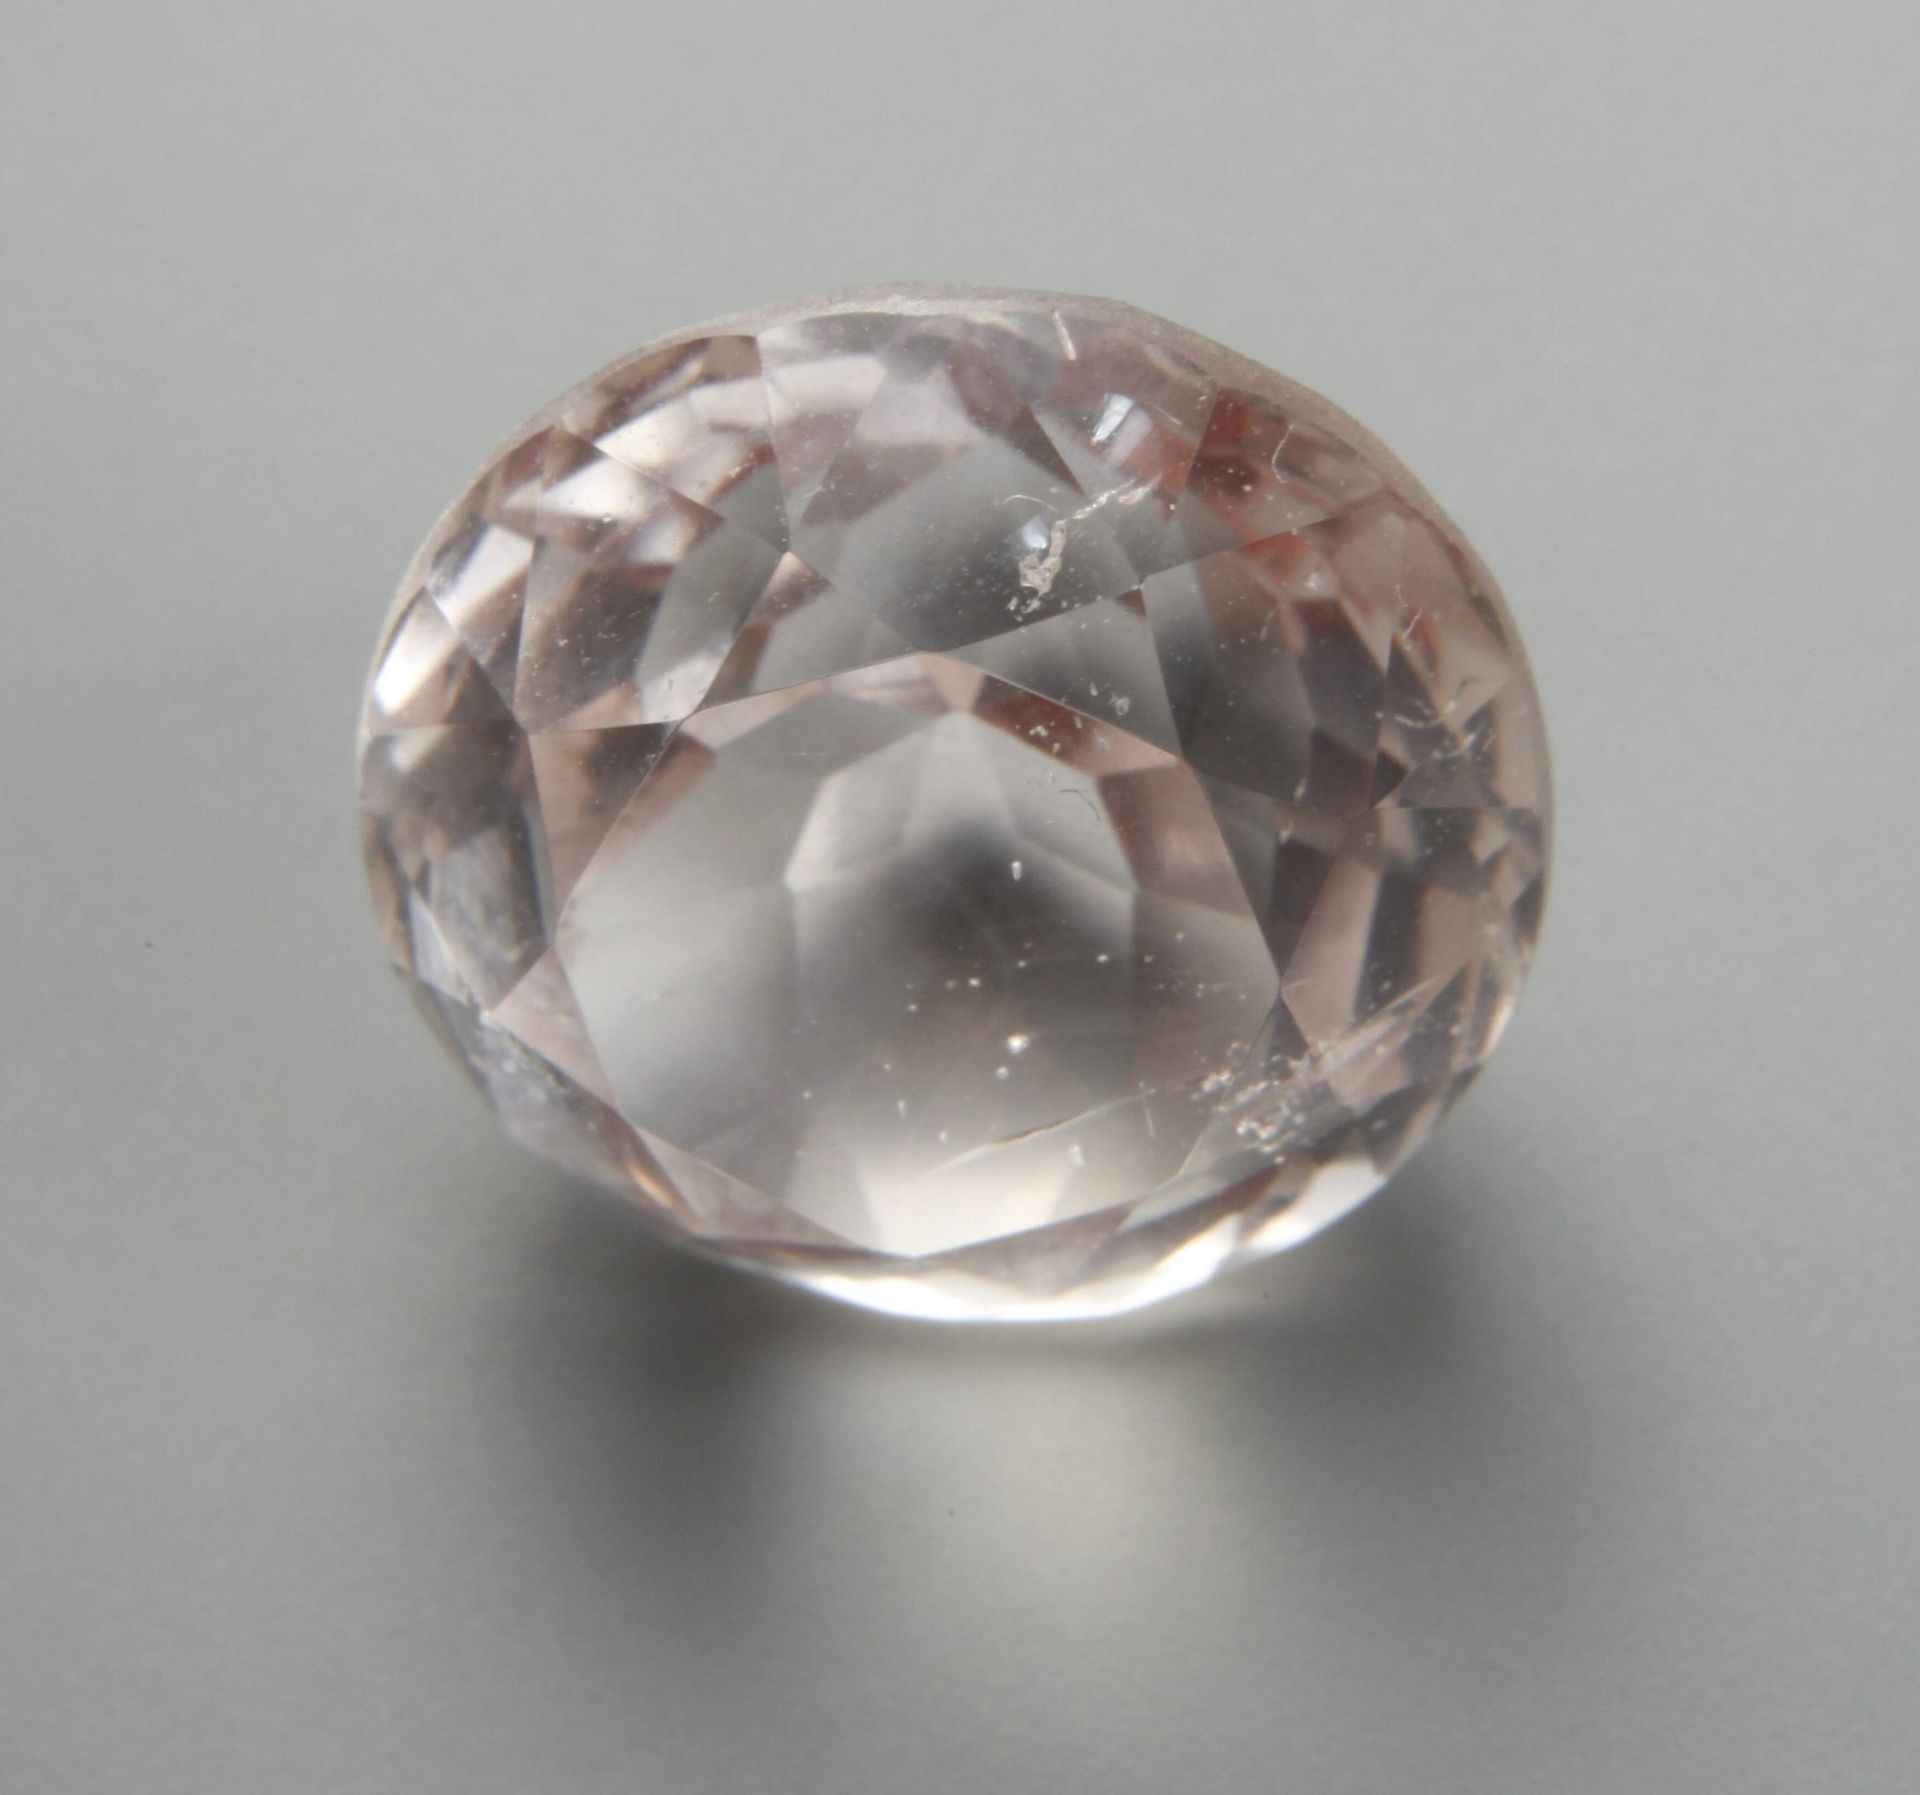 Facetted morganite of 11.9 ct - Image 4 of 4